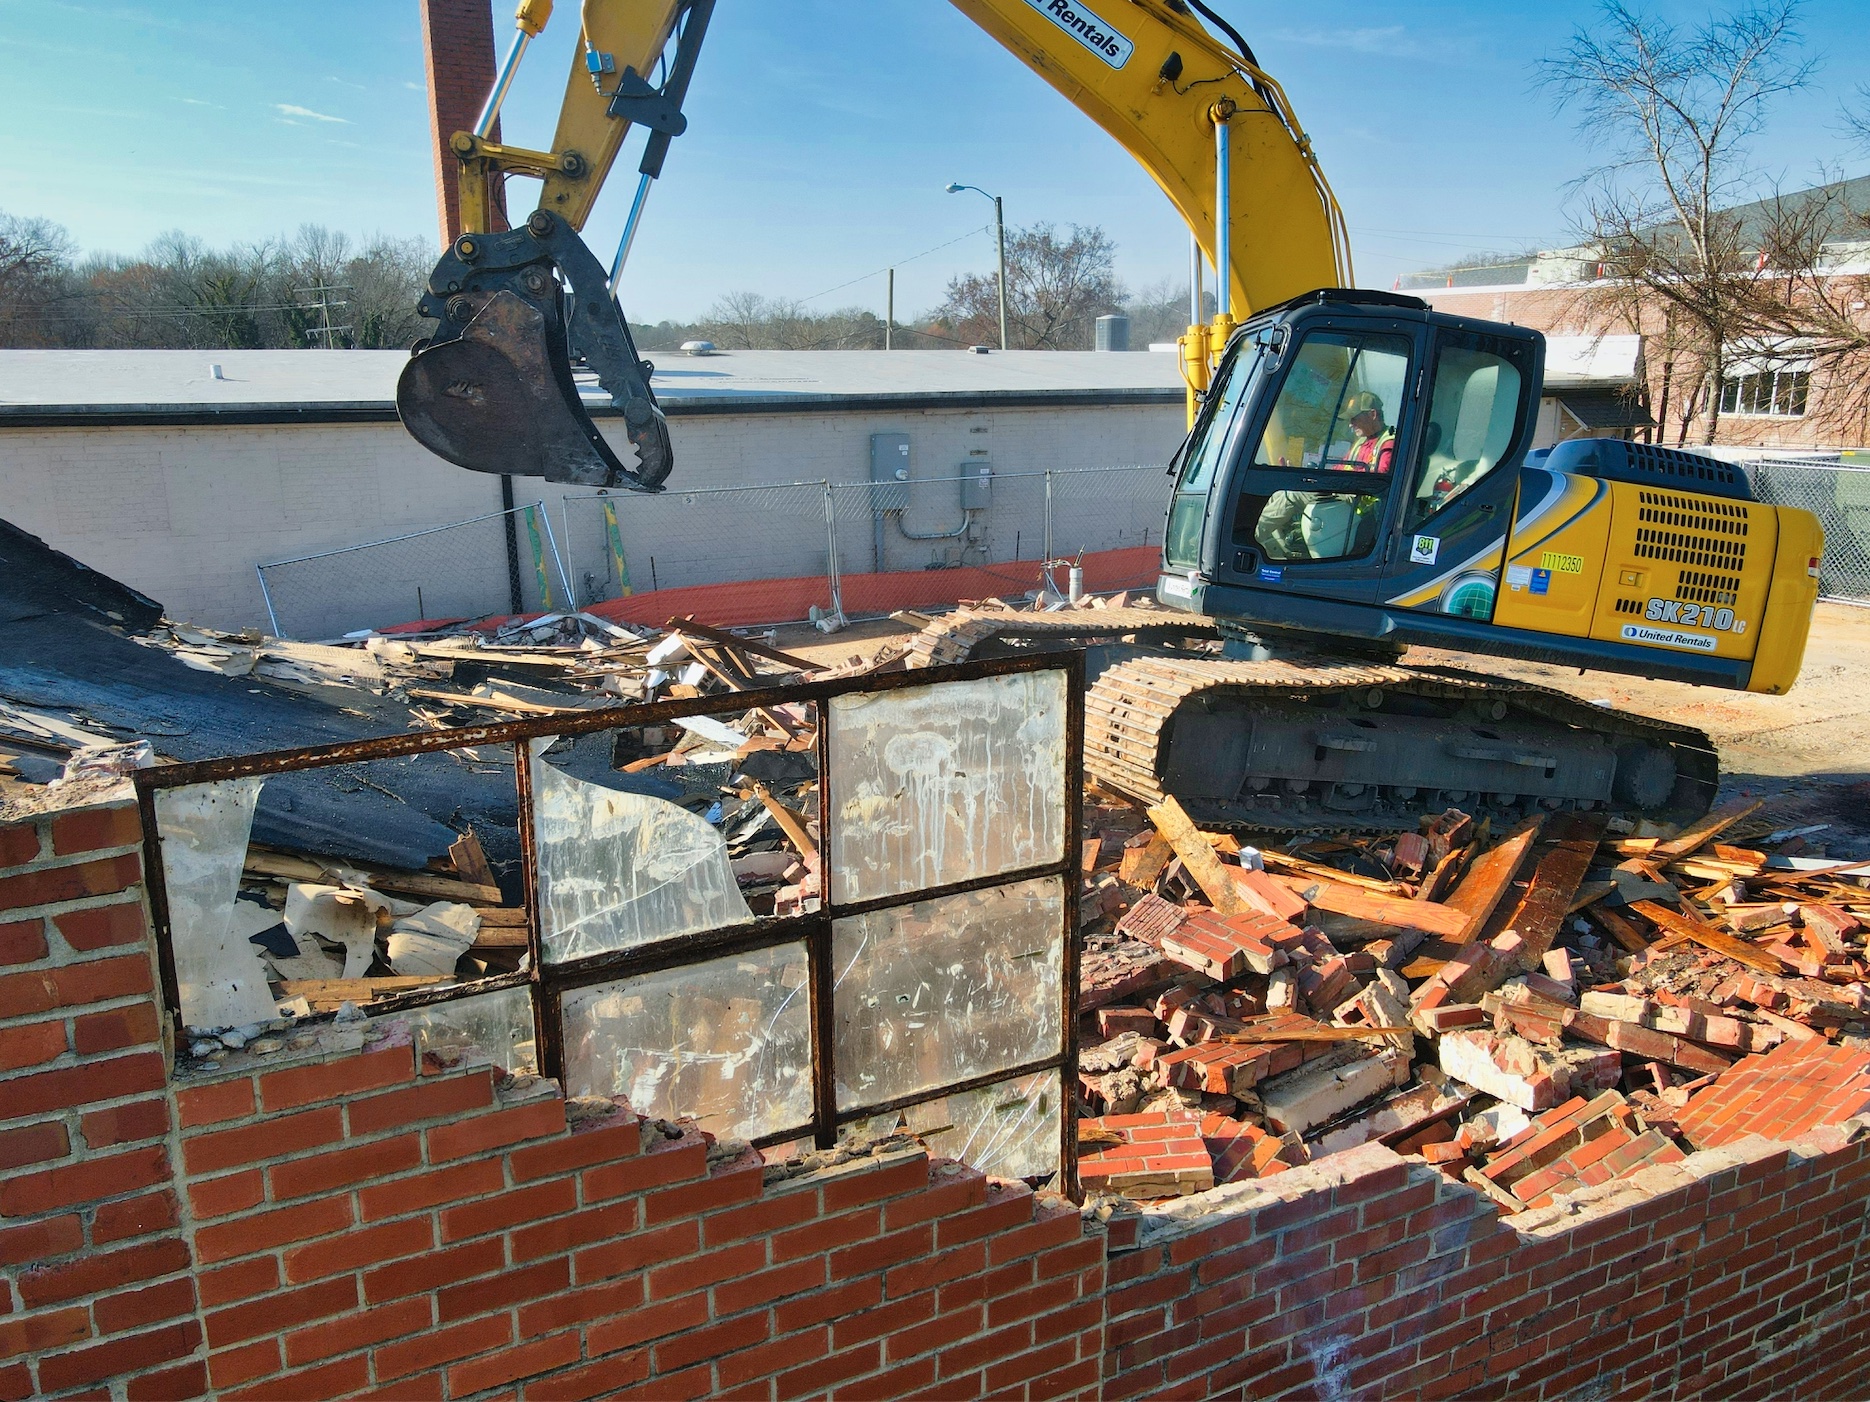 Building is demolished in downtown Pittsboro to make room for a new two story venue as part of the SoCo project. Image by Gene Gallin, via Unsplash.com.